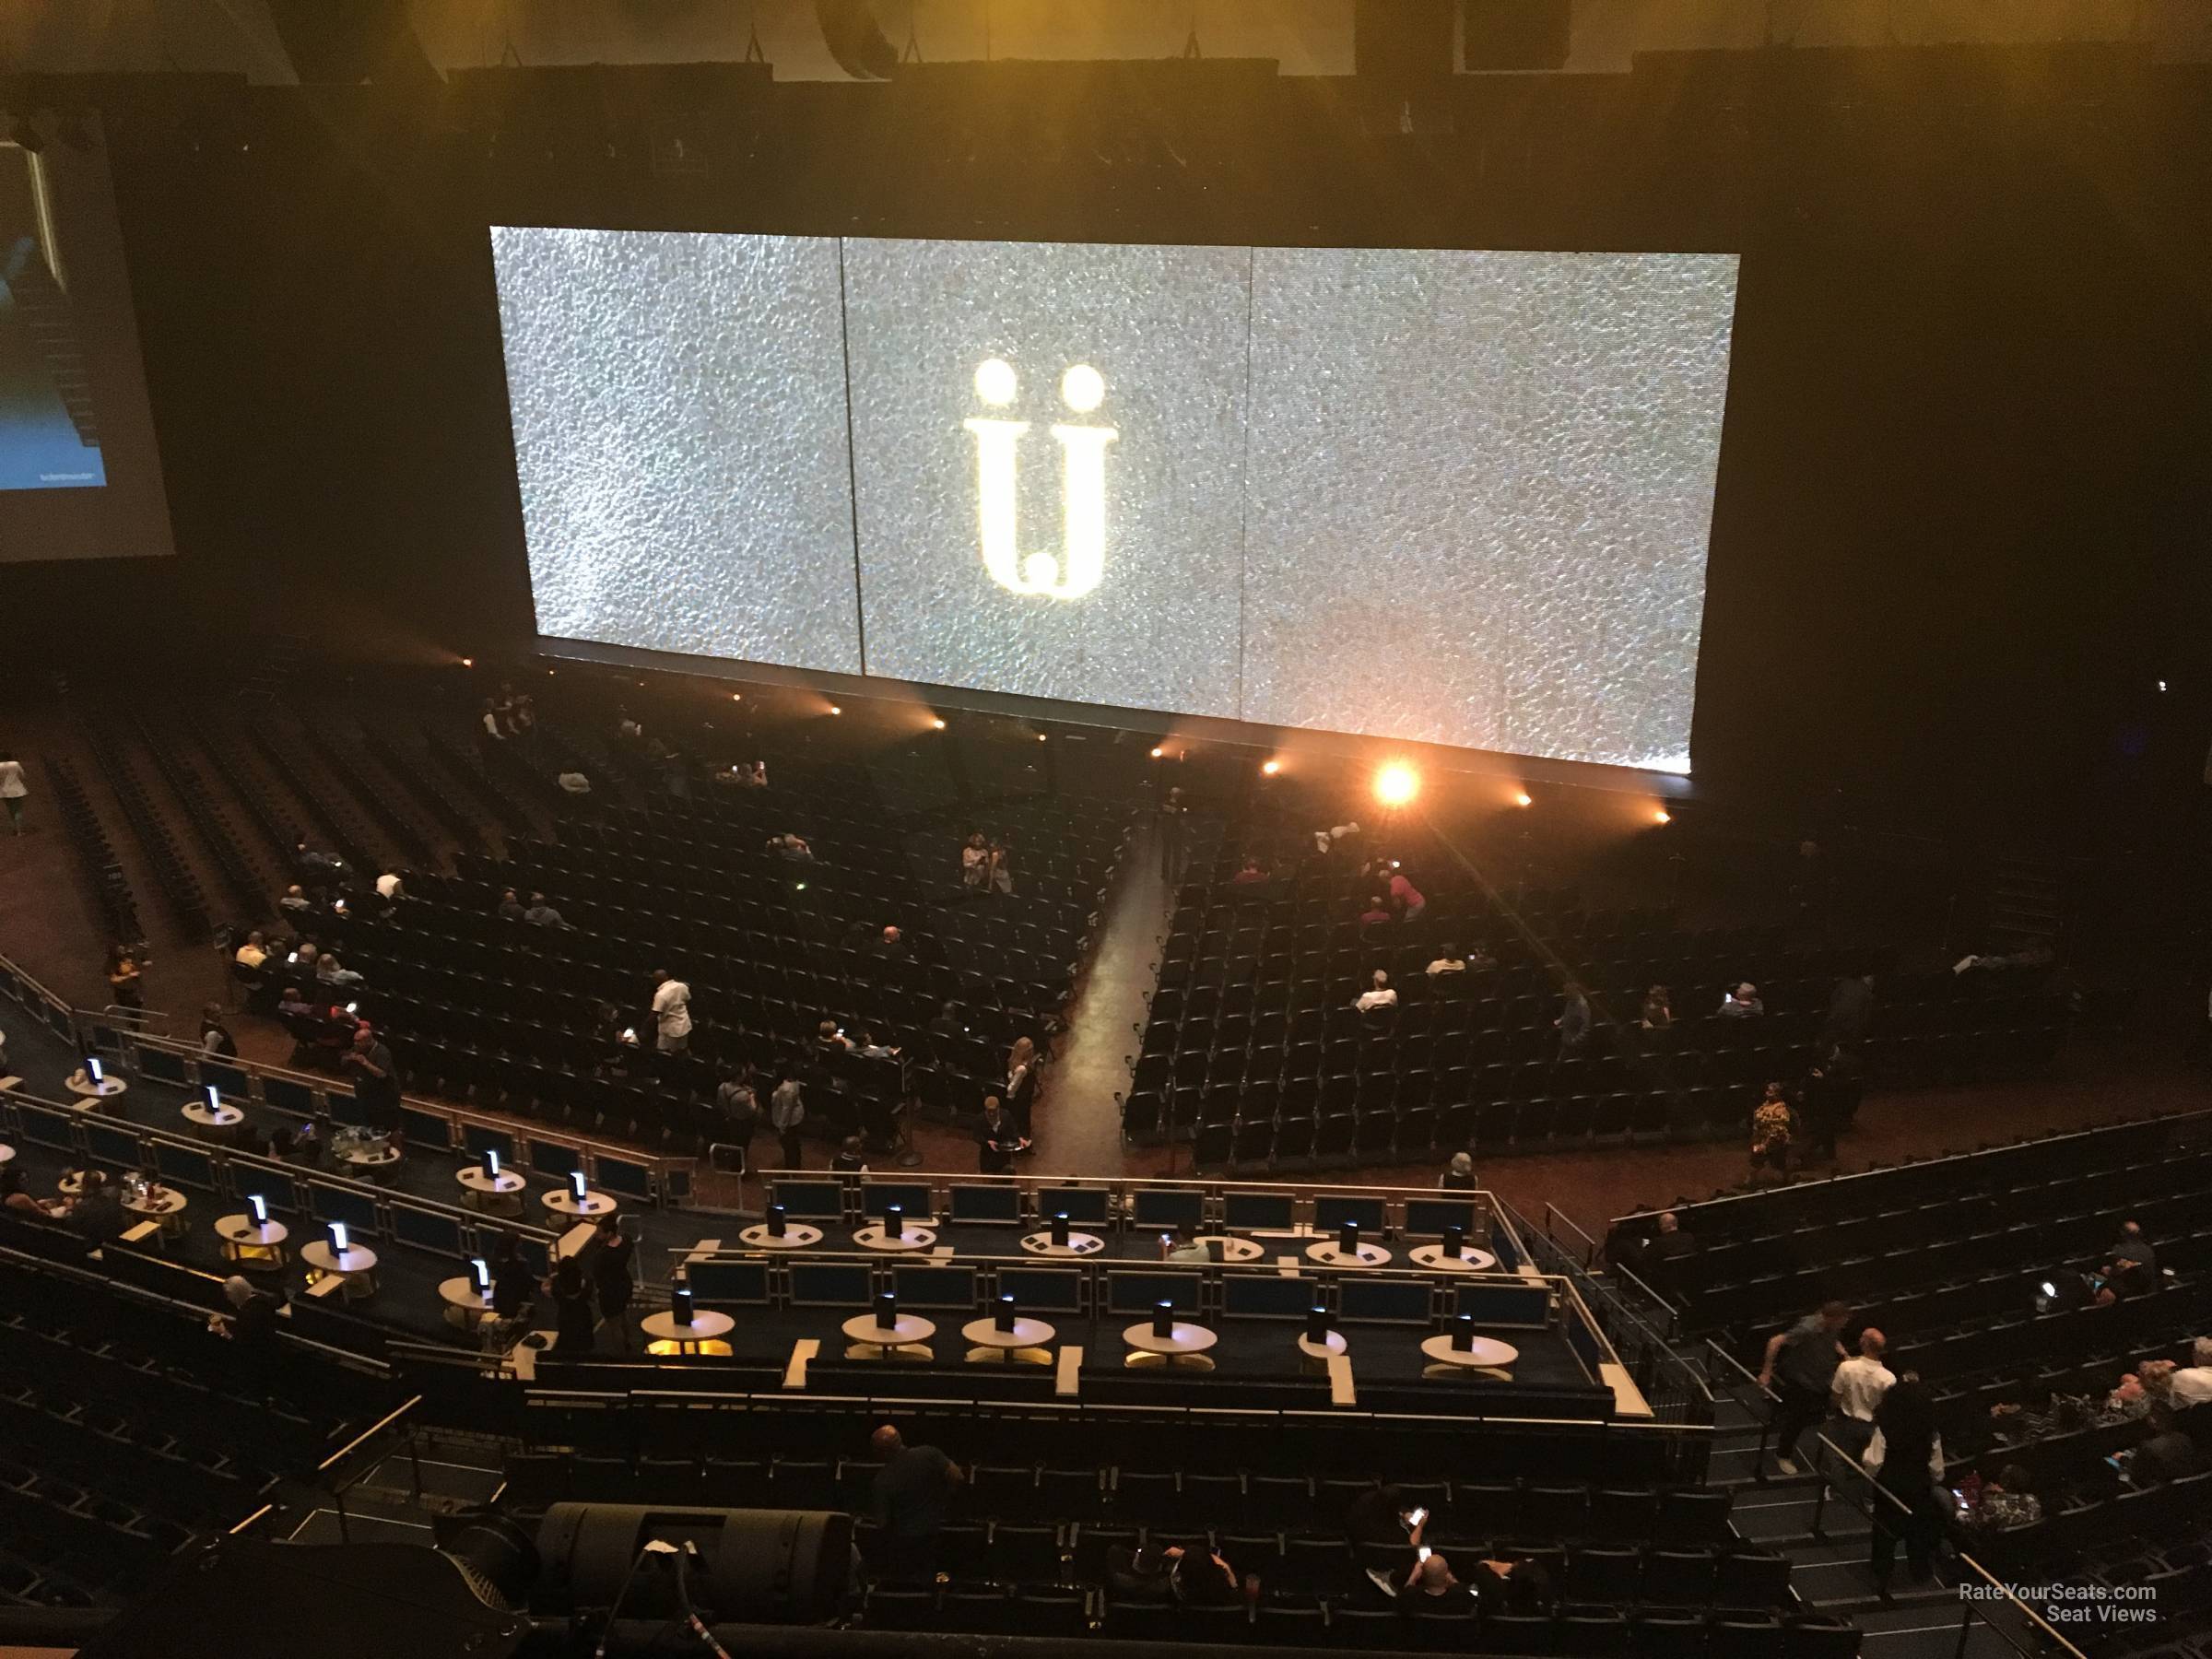 section 403, row b seat view  - dolby live at park mgm